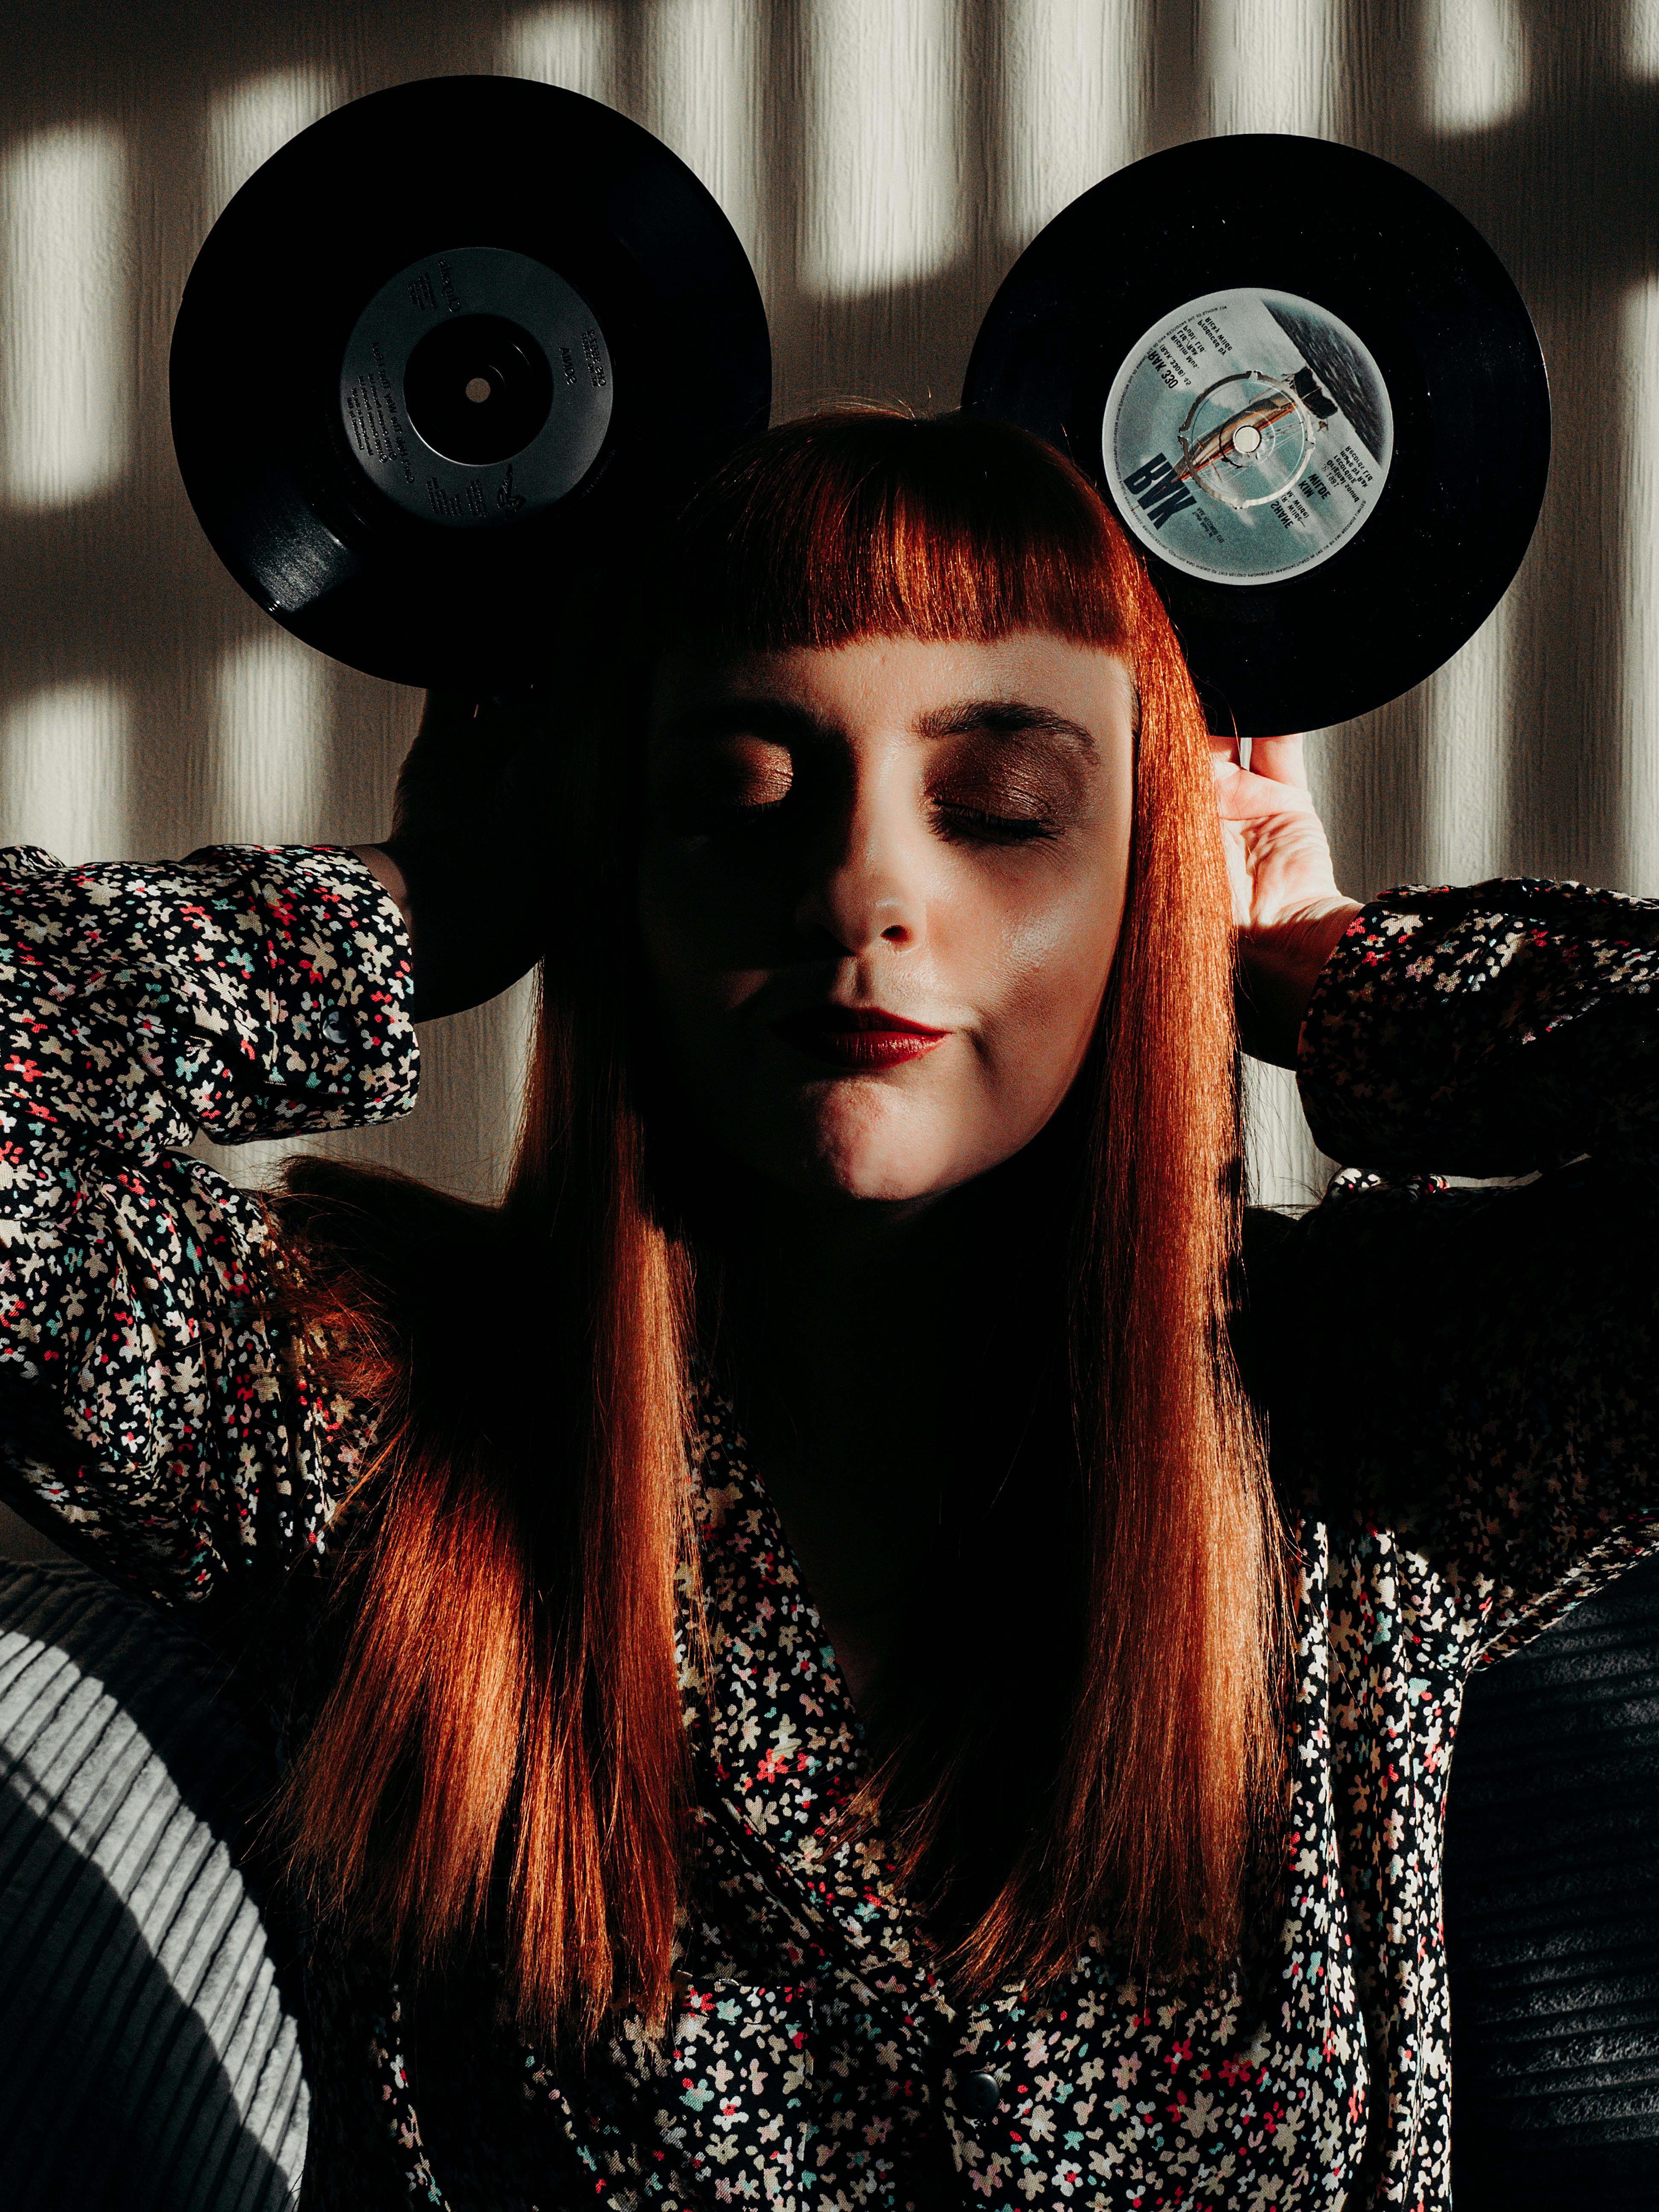 red hair woman with closed eyes holding vinyl records as mouse ears